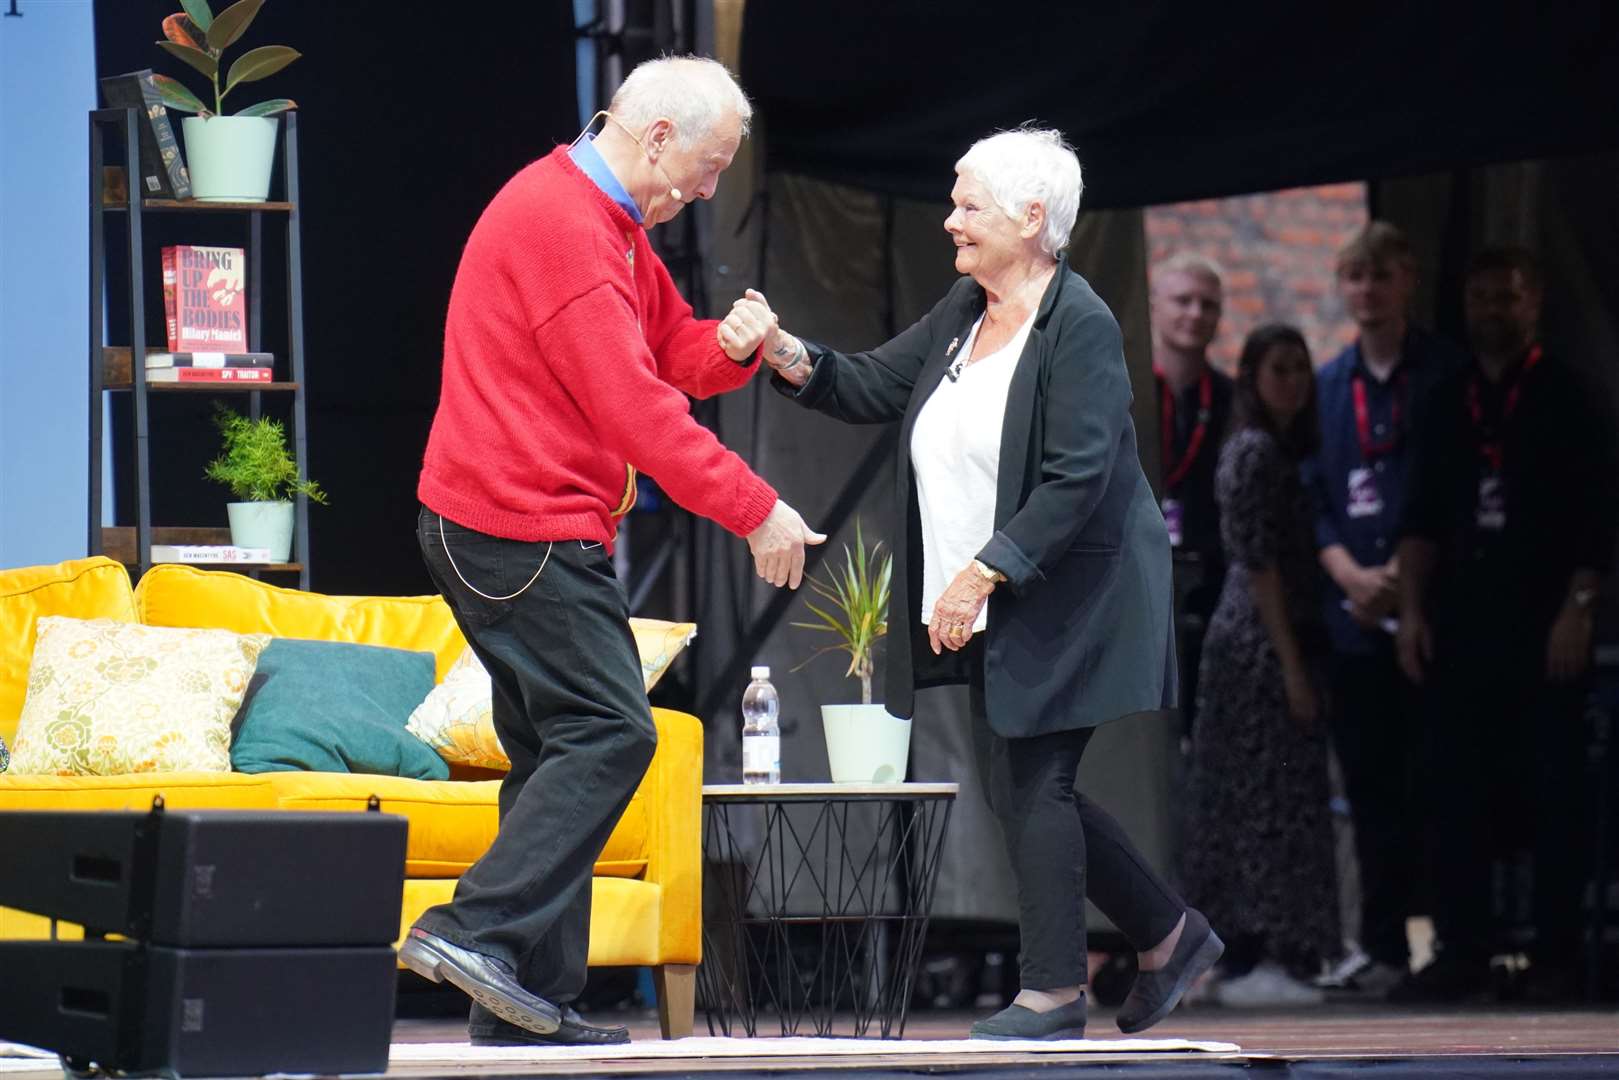 Dame Judi Dench is greeted by Gyles Brandreth at the festival (Jonathan Brady/PA)